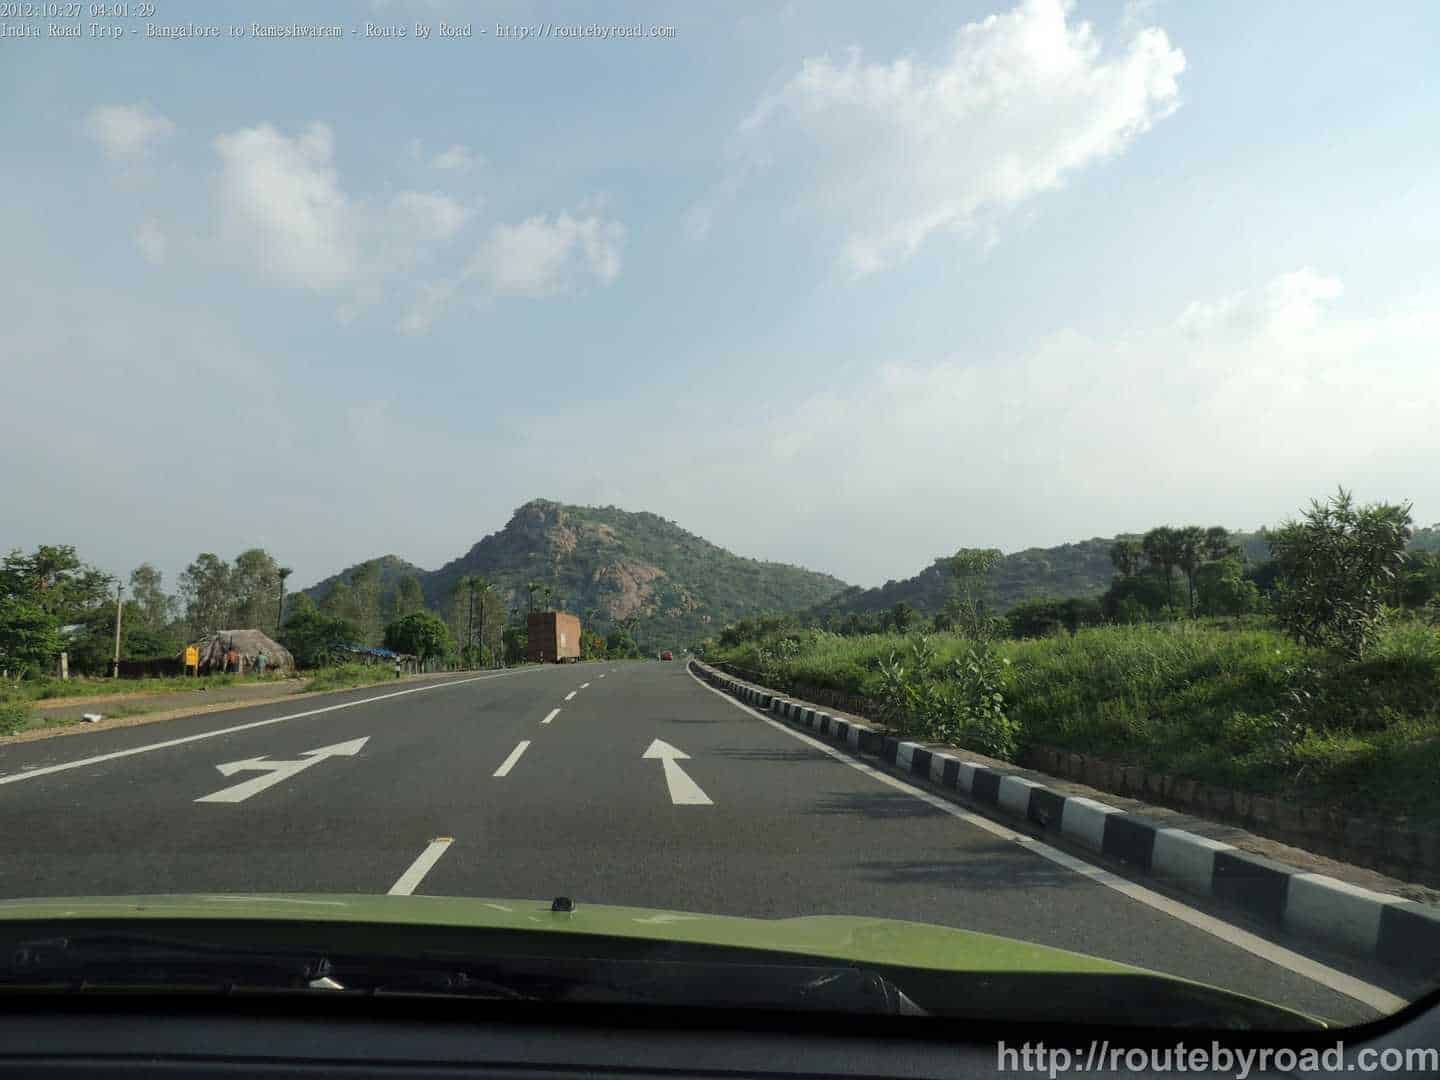 India Road Trip - Route By Road - http://routebyroad.com